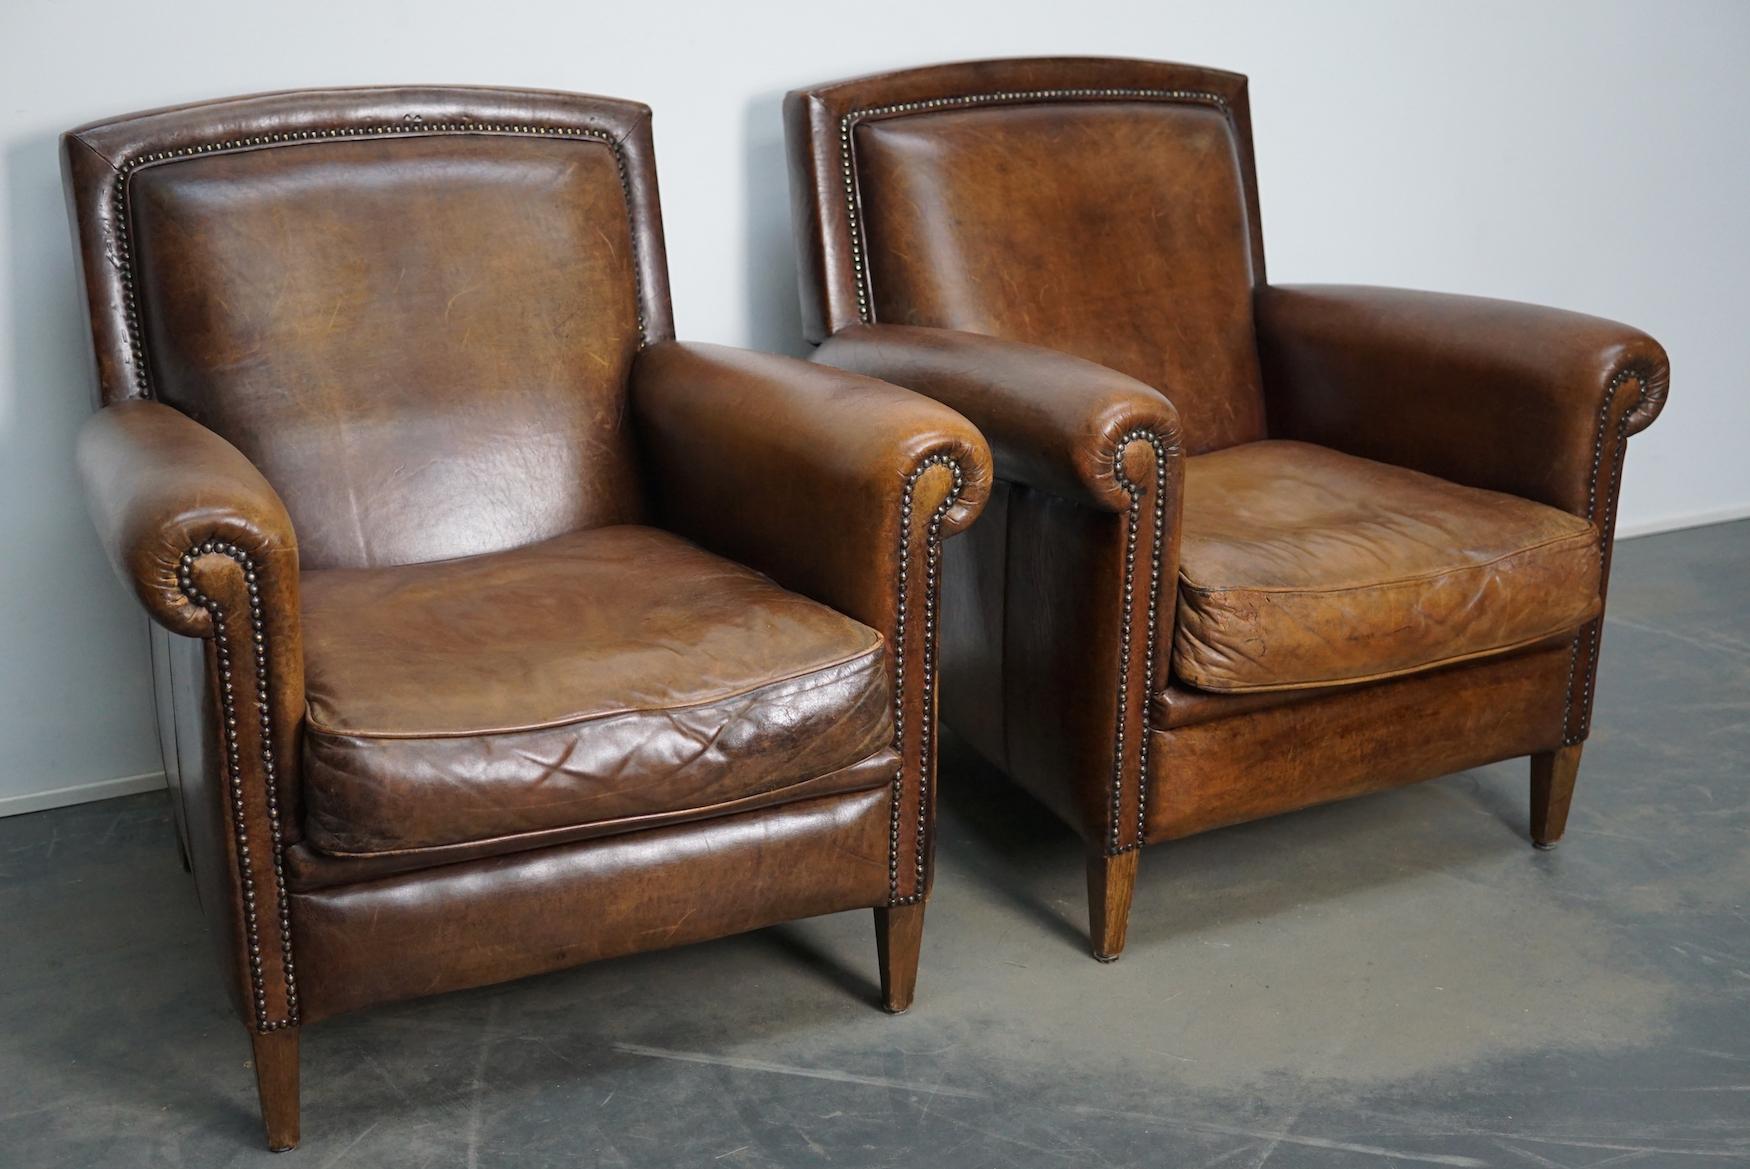 This pair of cognac-colored leather club chairs come from the Netherlands. They are upholstered with cognac-colored leather and feature metal rivets and wooden legs.